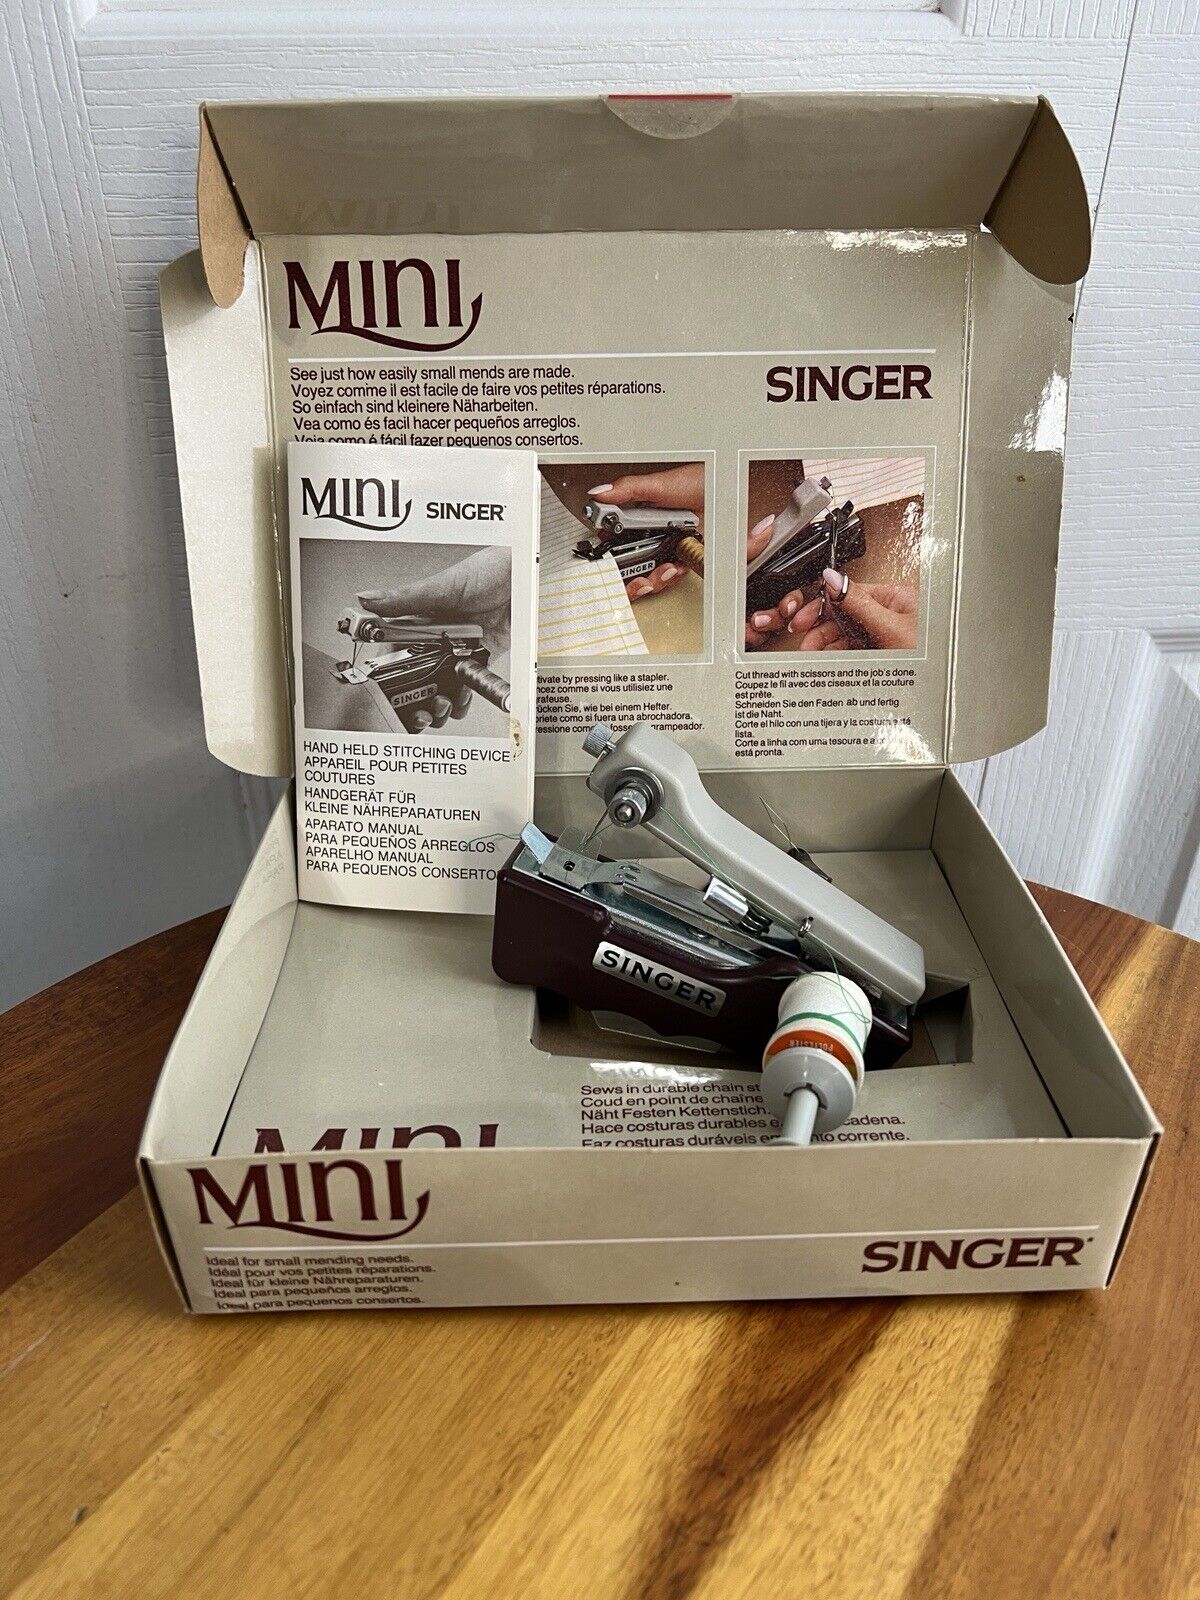 Mini Hand Held Stitching Singer Portable Manual Sewing Machine Vintage In Box